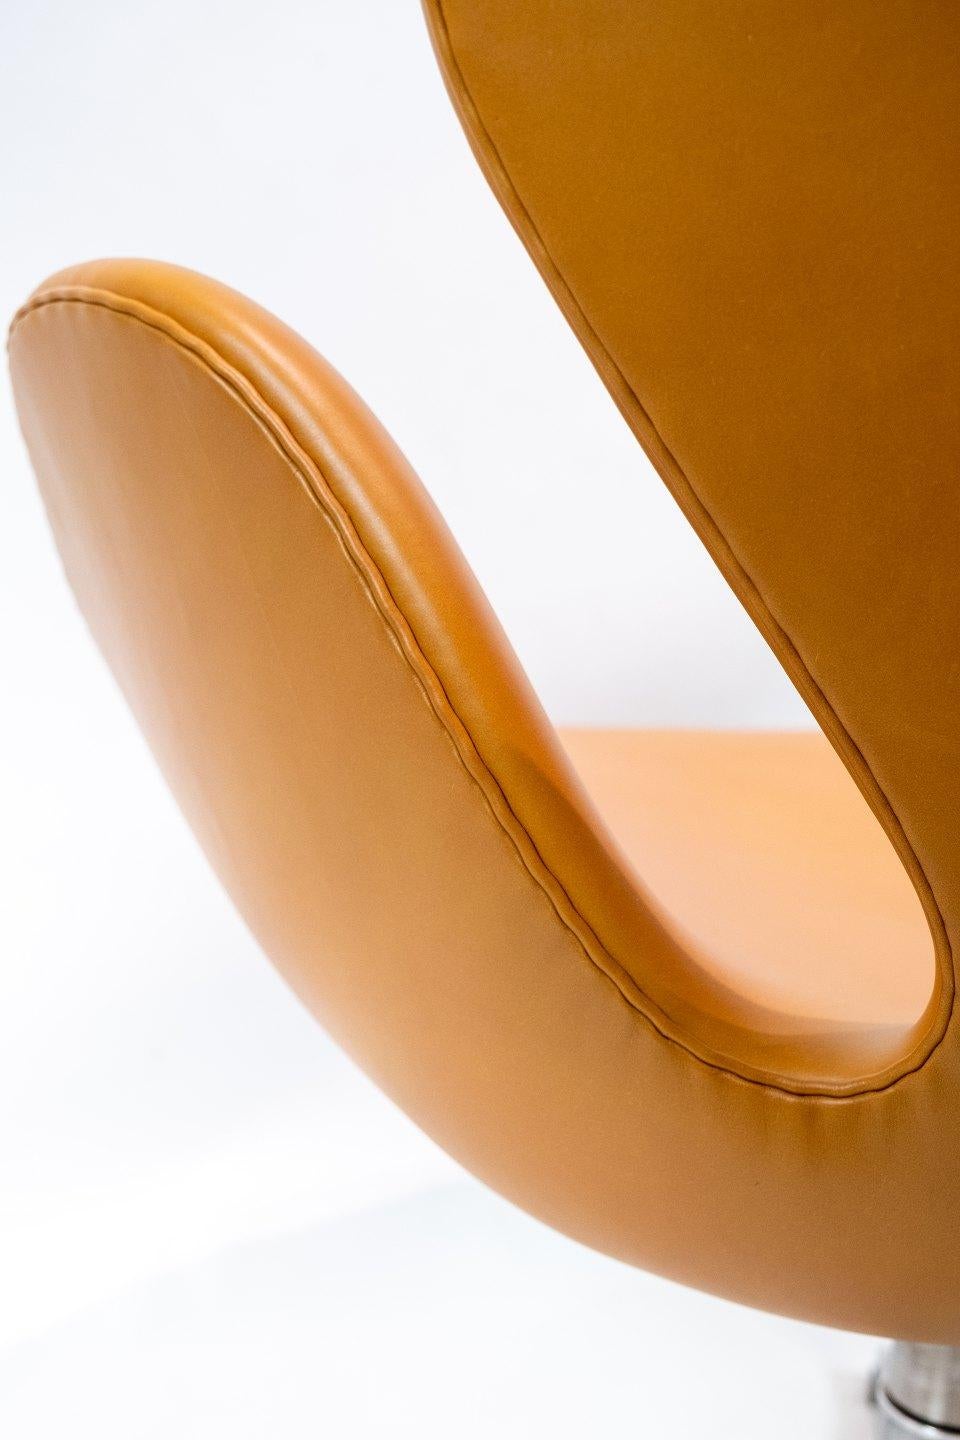 Mid-20th Century Swan Chair, Model 3320, by Arne Jacobsen and Fritz Hansen